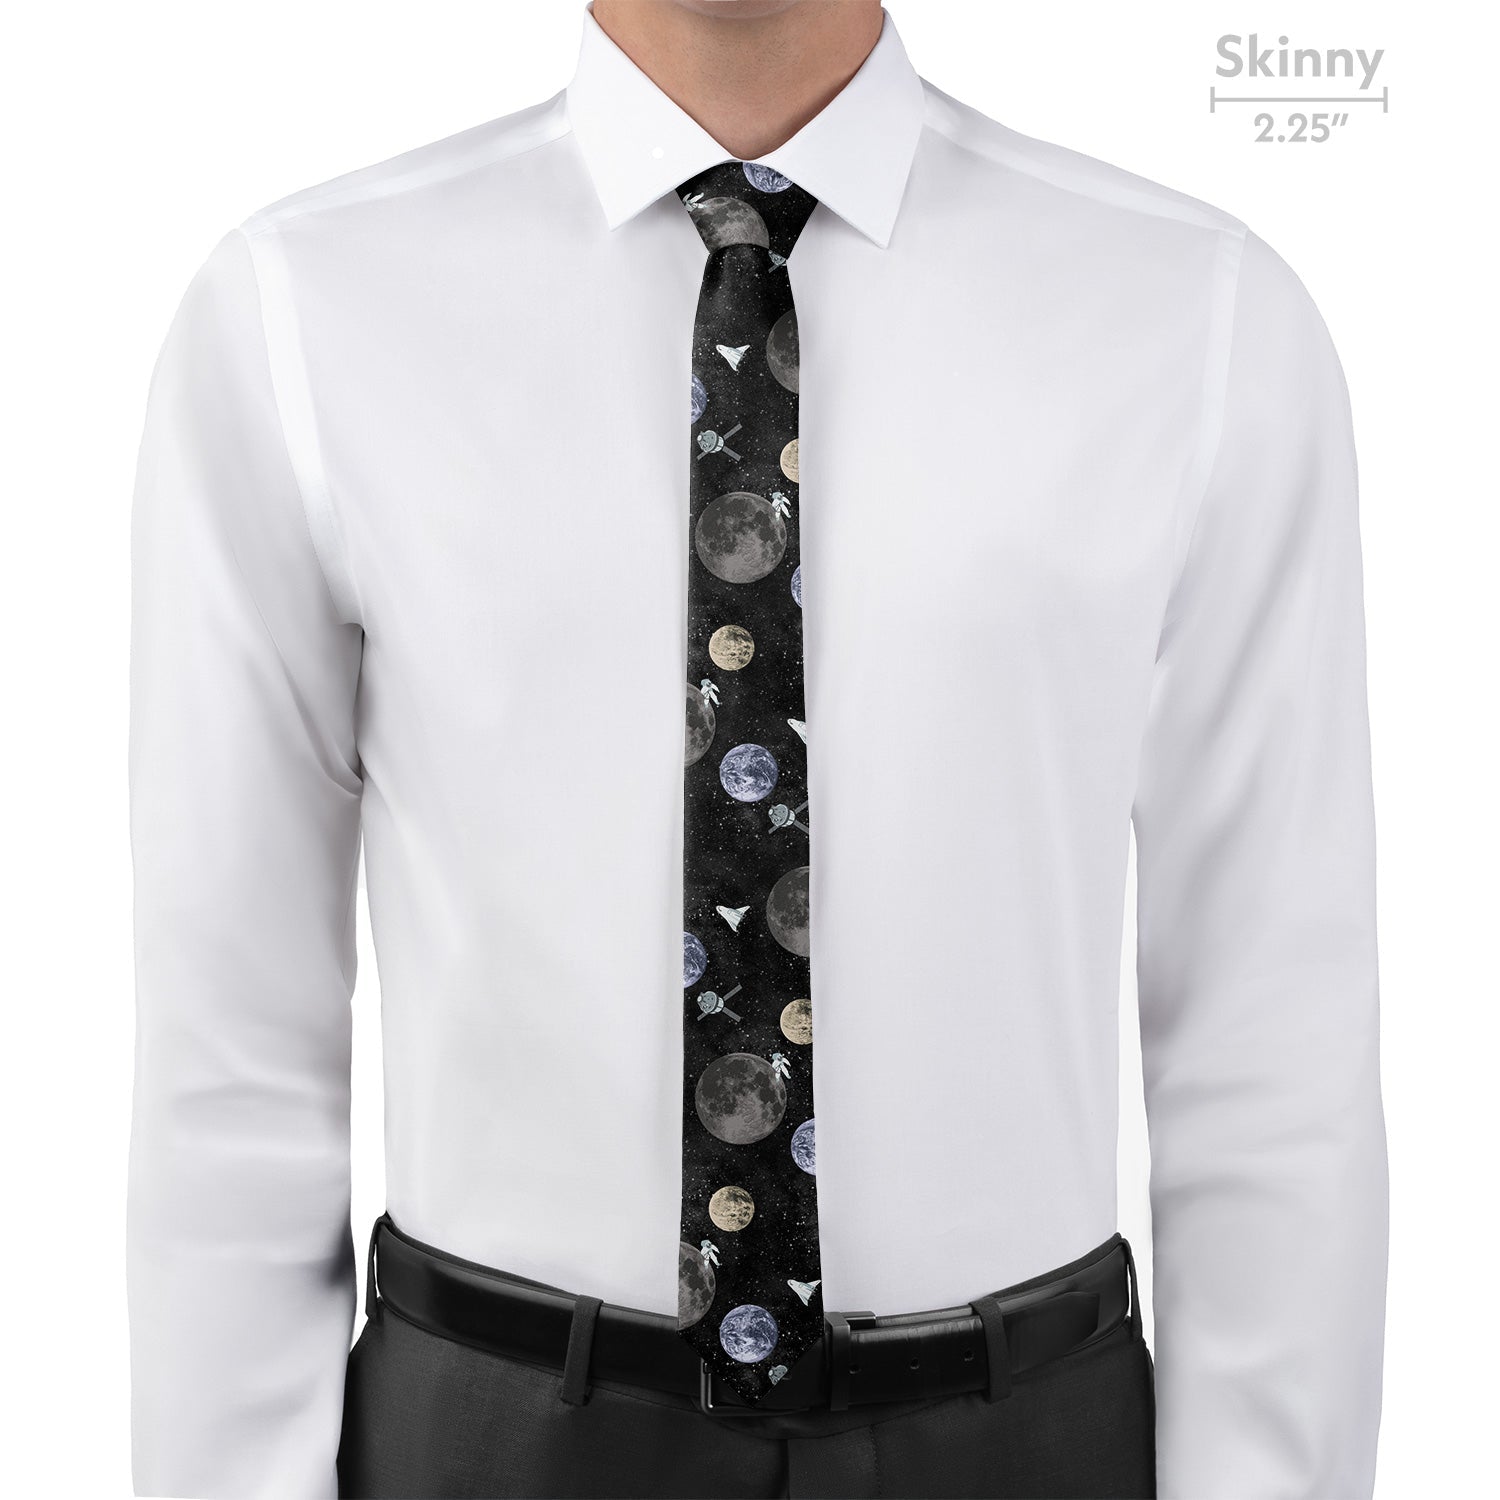 Outer Space Necktie - Skinny - Knotty Tie Co.